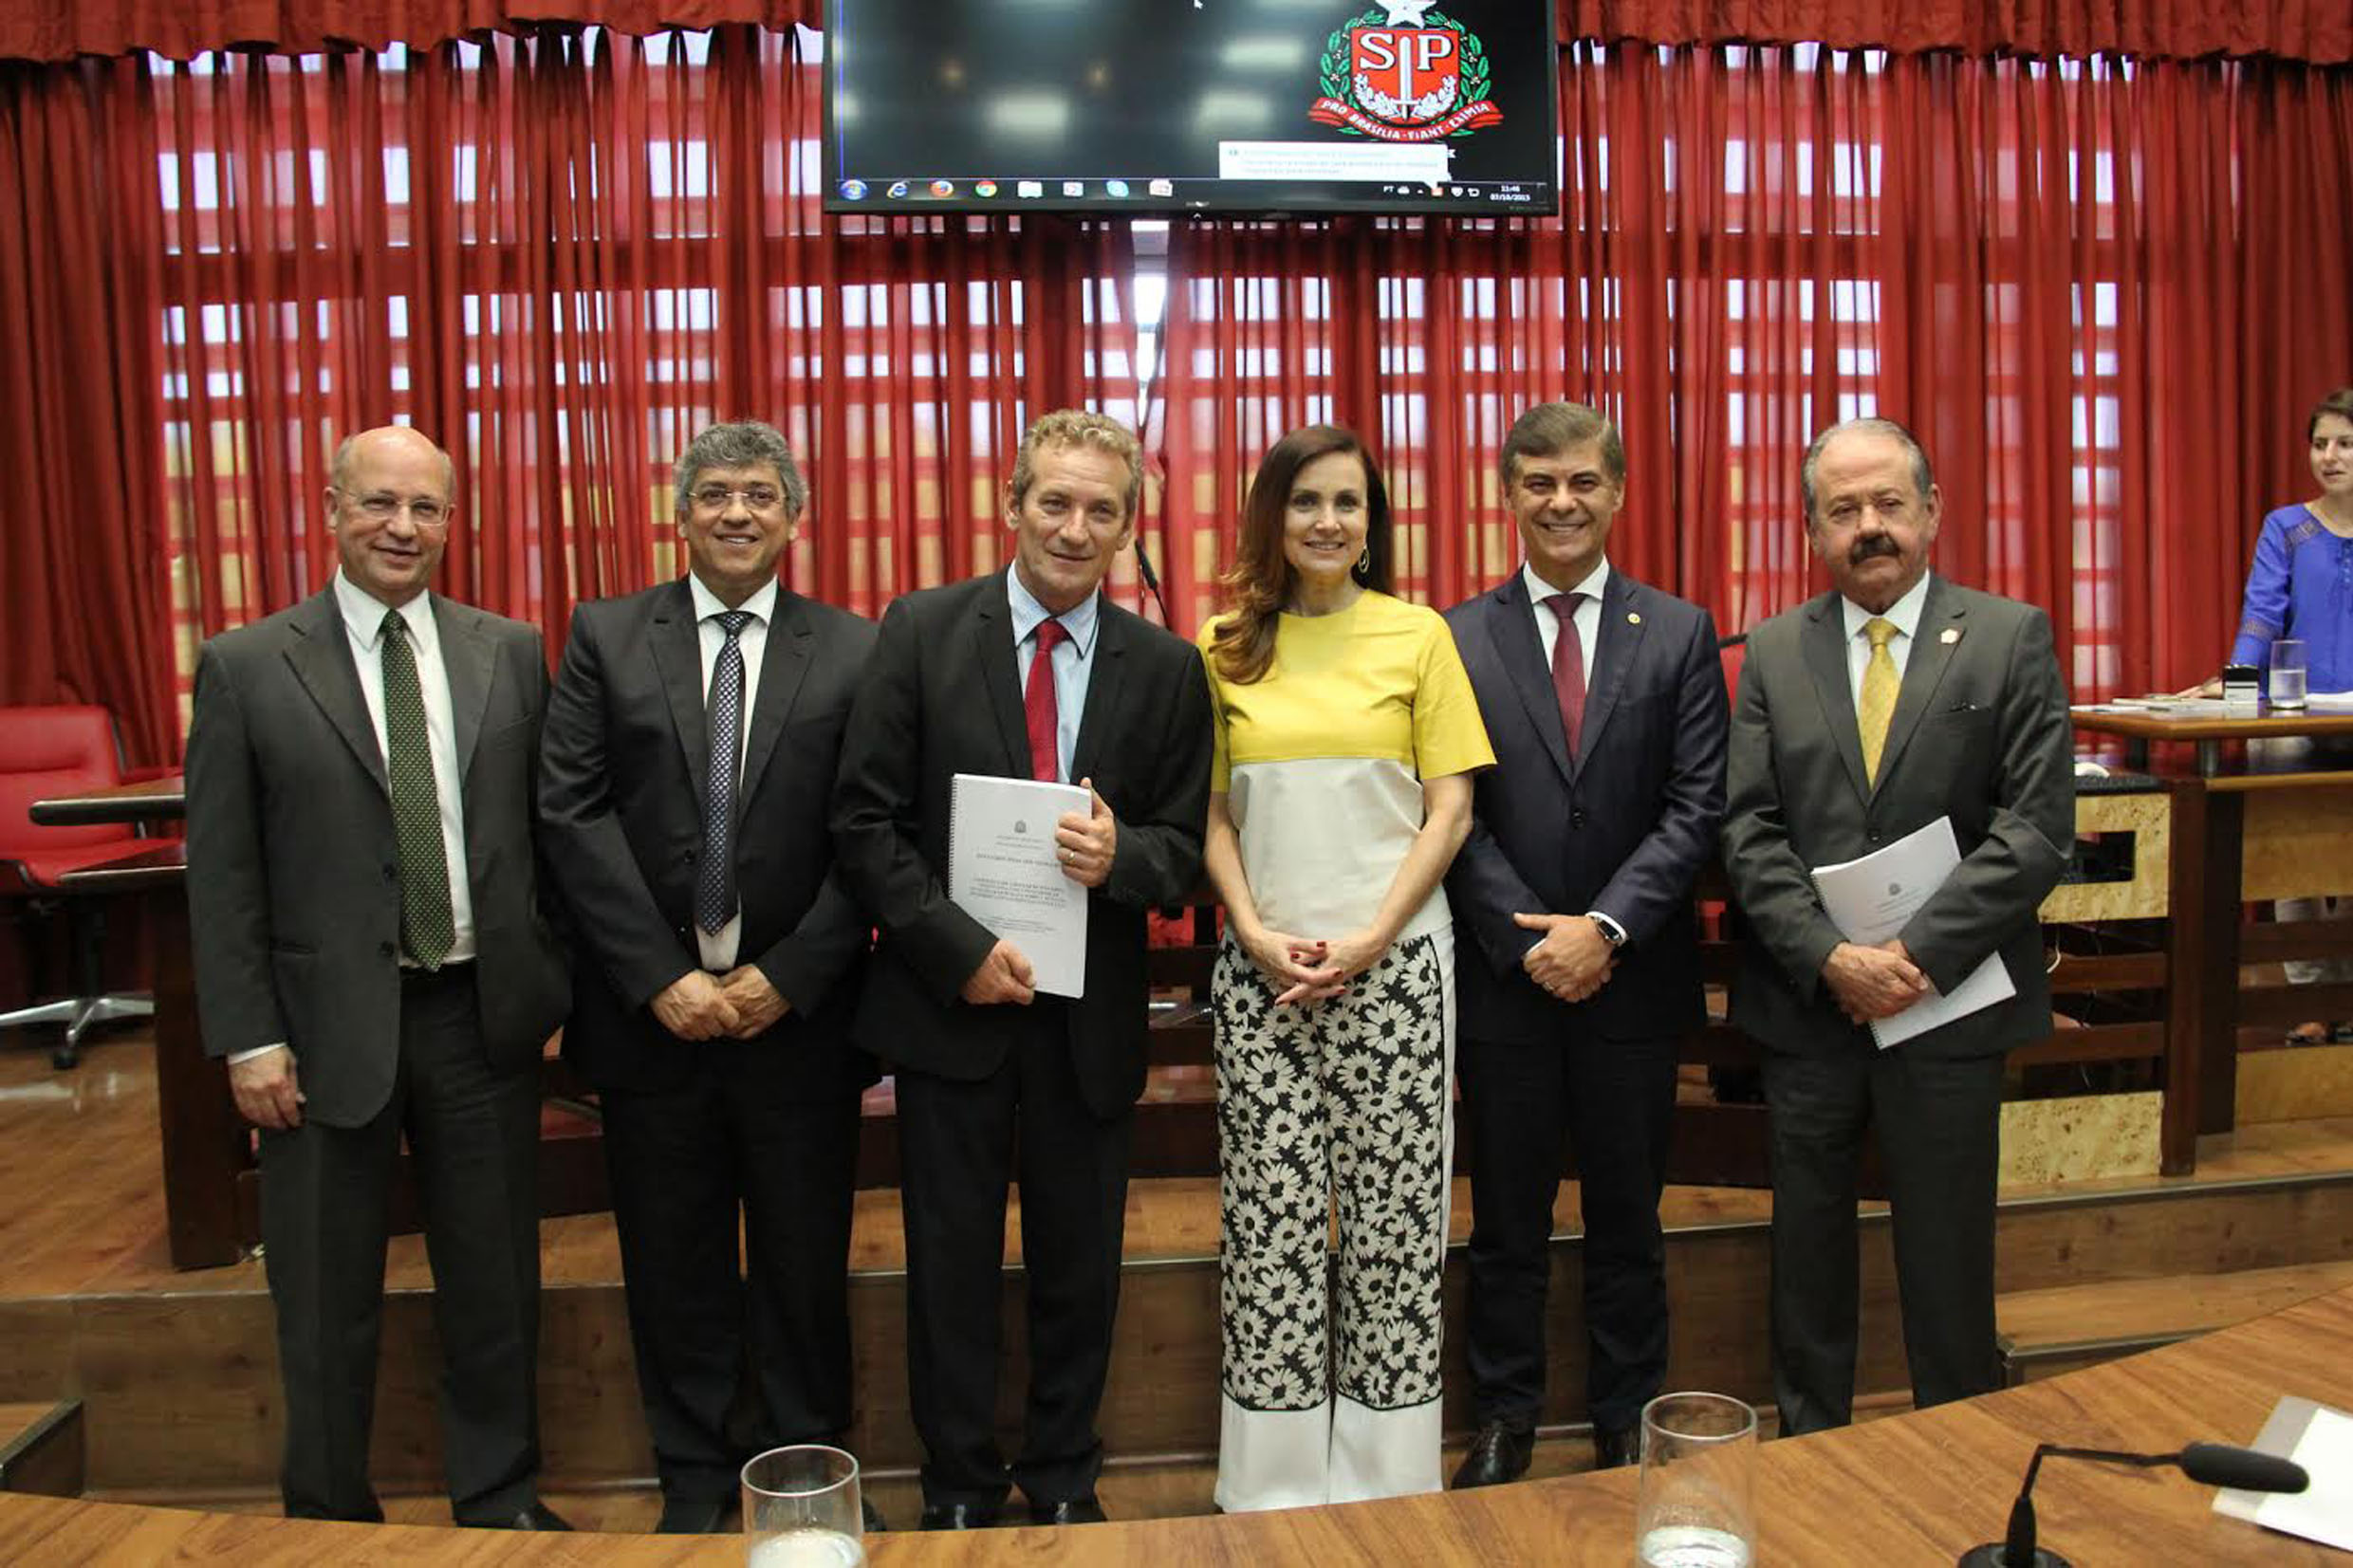 Carlos Neder, Padre Afonso, Ed Thomas, Analice Fernandes, Gil Lancaster e Celso Giglio<a style='float:right;color:#ccc' href='https://www3.al.sp.gov.br/repositorio/noticia/N-10-2015/fg176832.jpg' target=_blank><i class='bi bi-zoom-in'></i> Clique para ver a imagem </a>